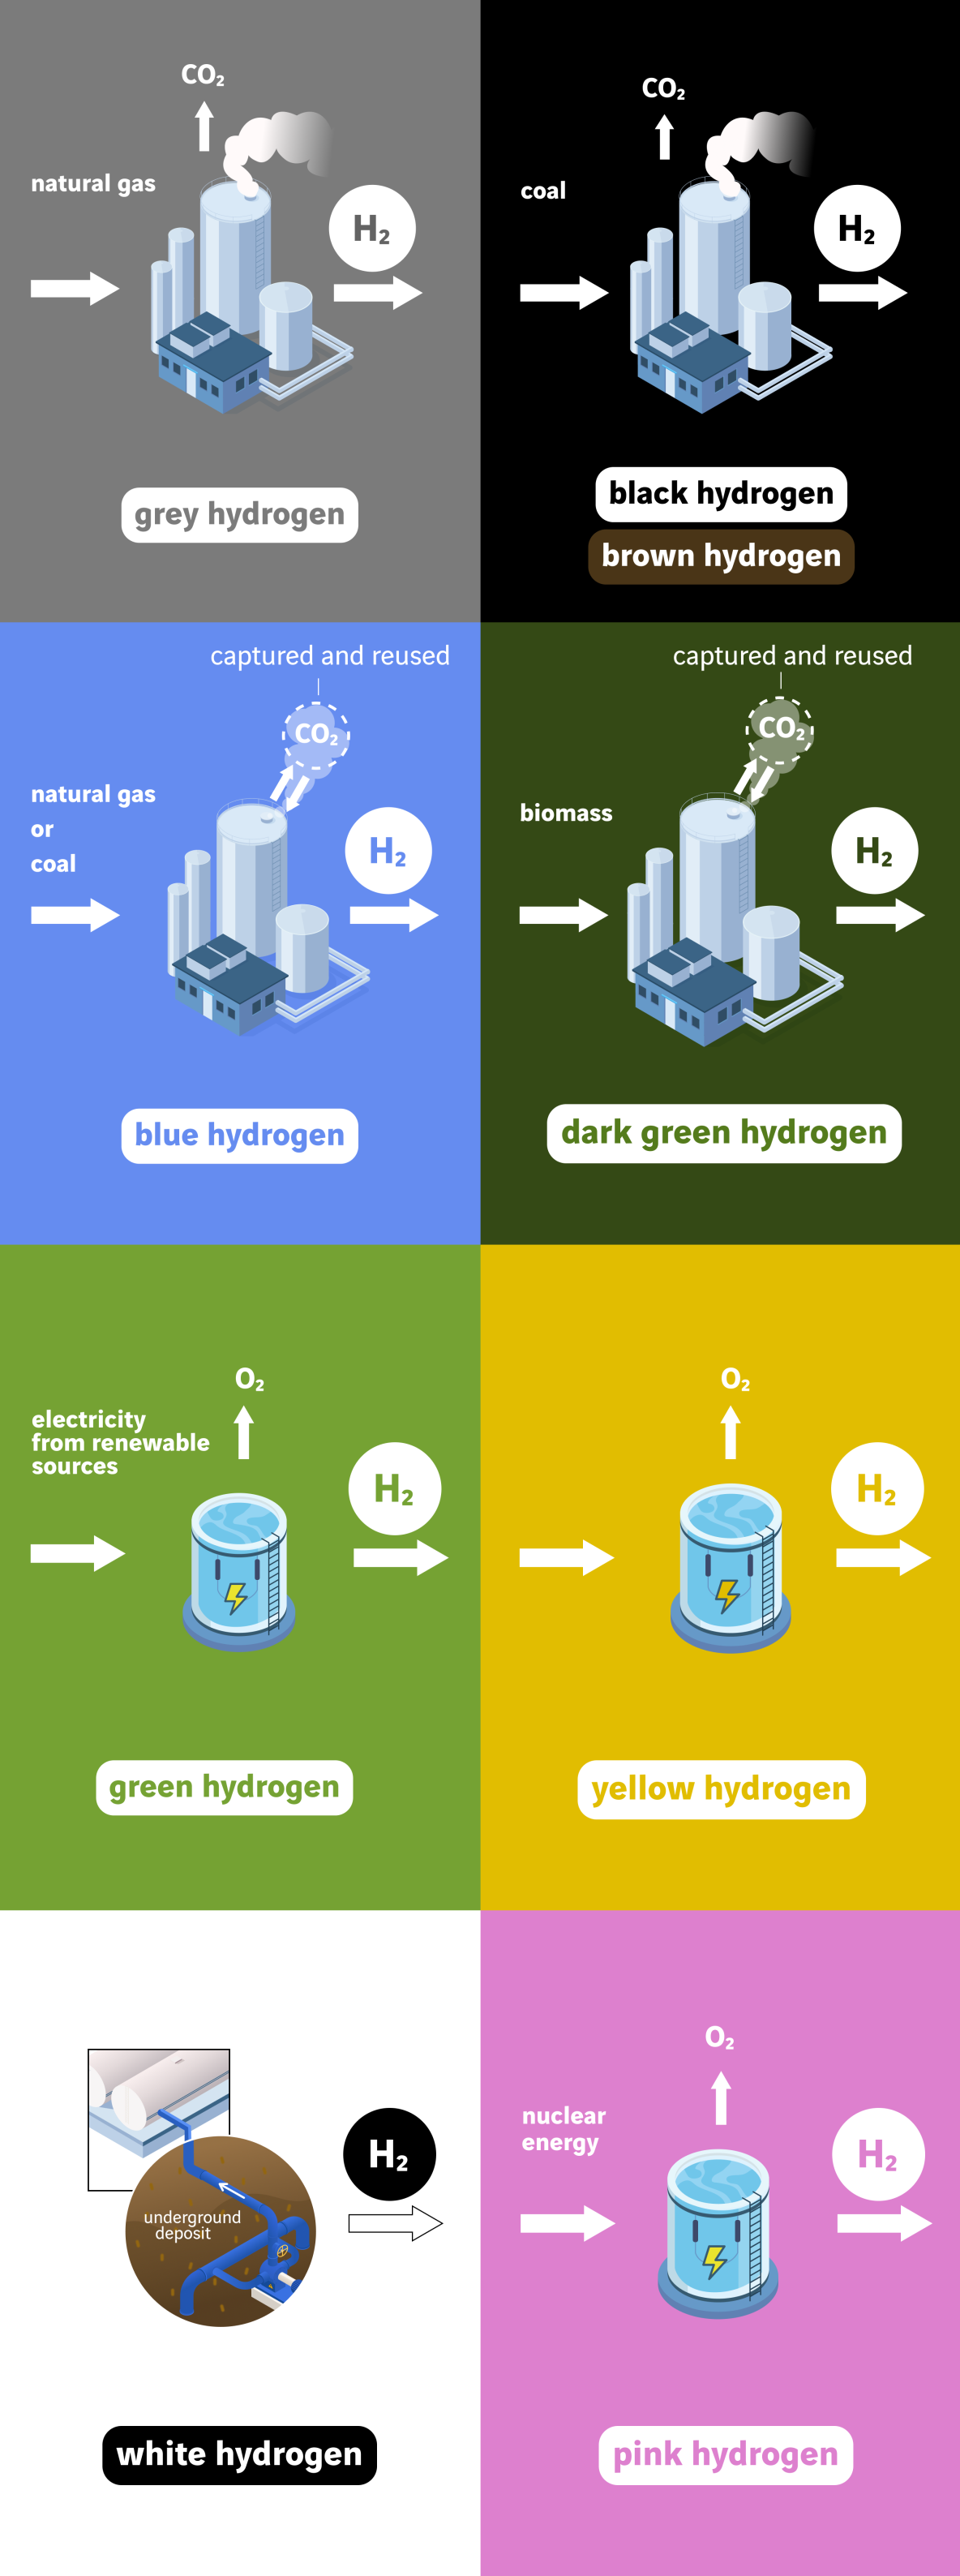 colours of hydrogen